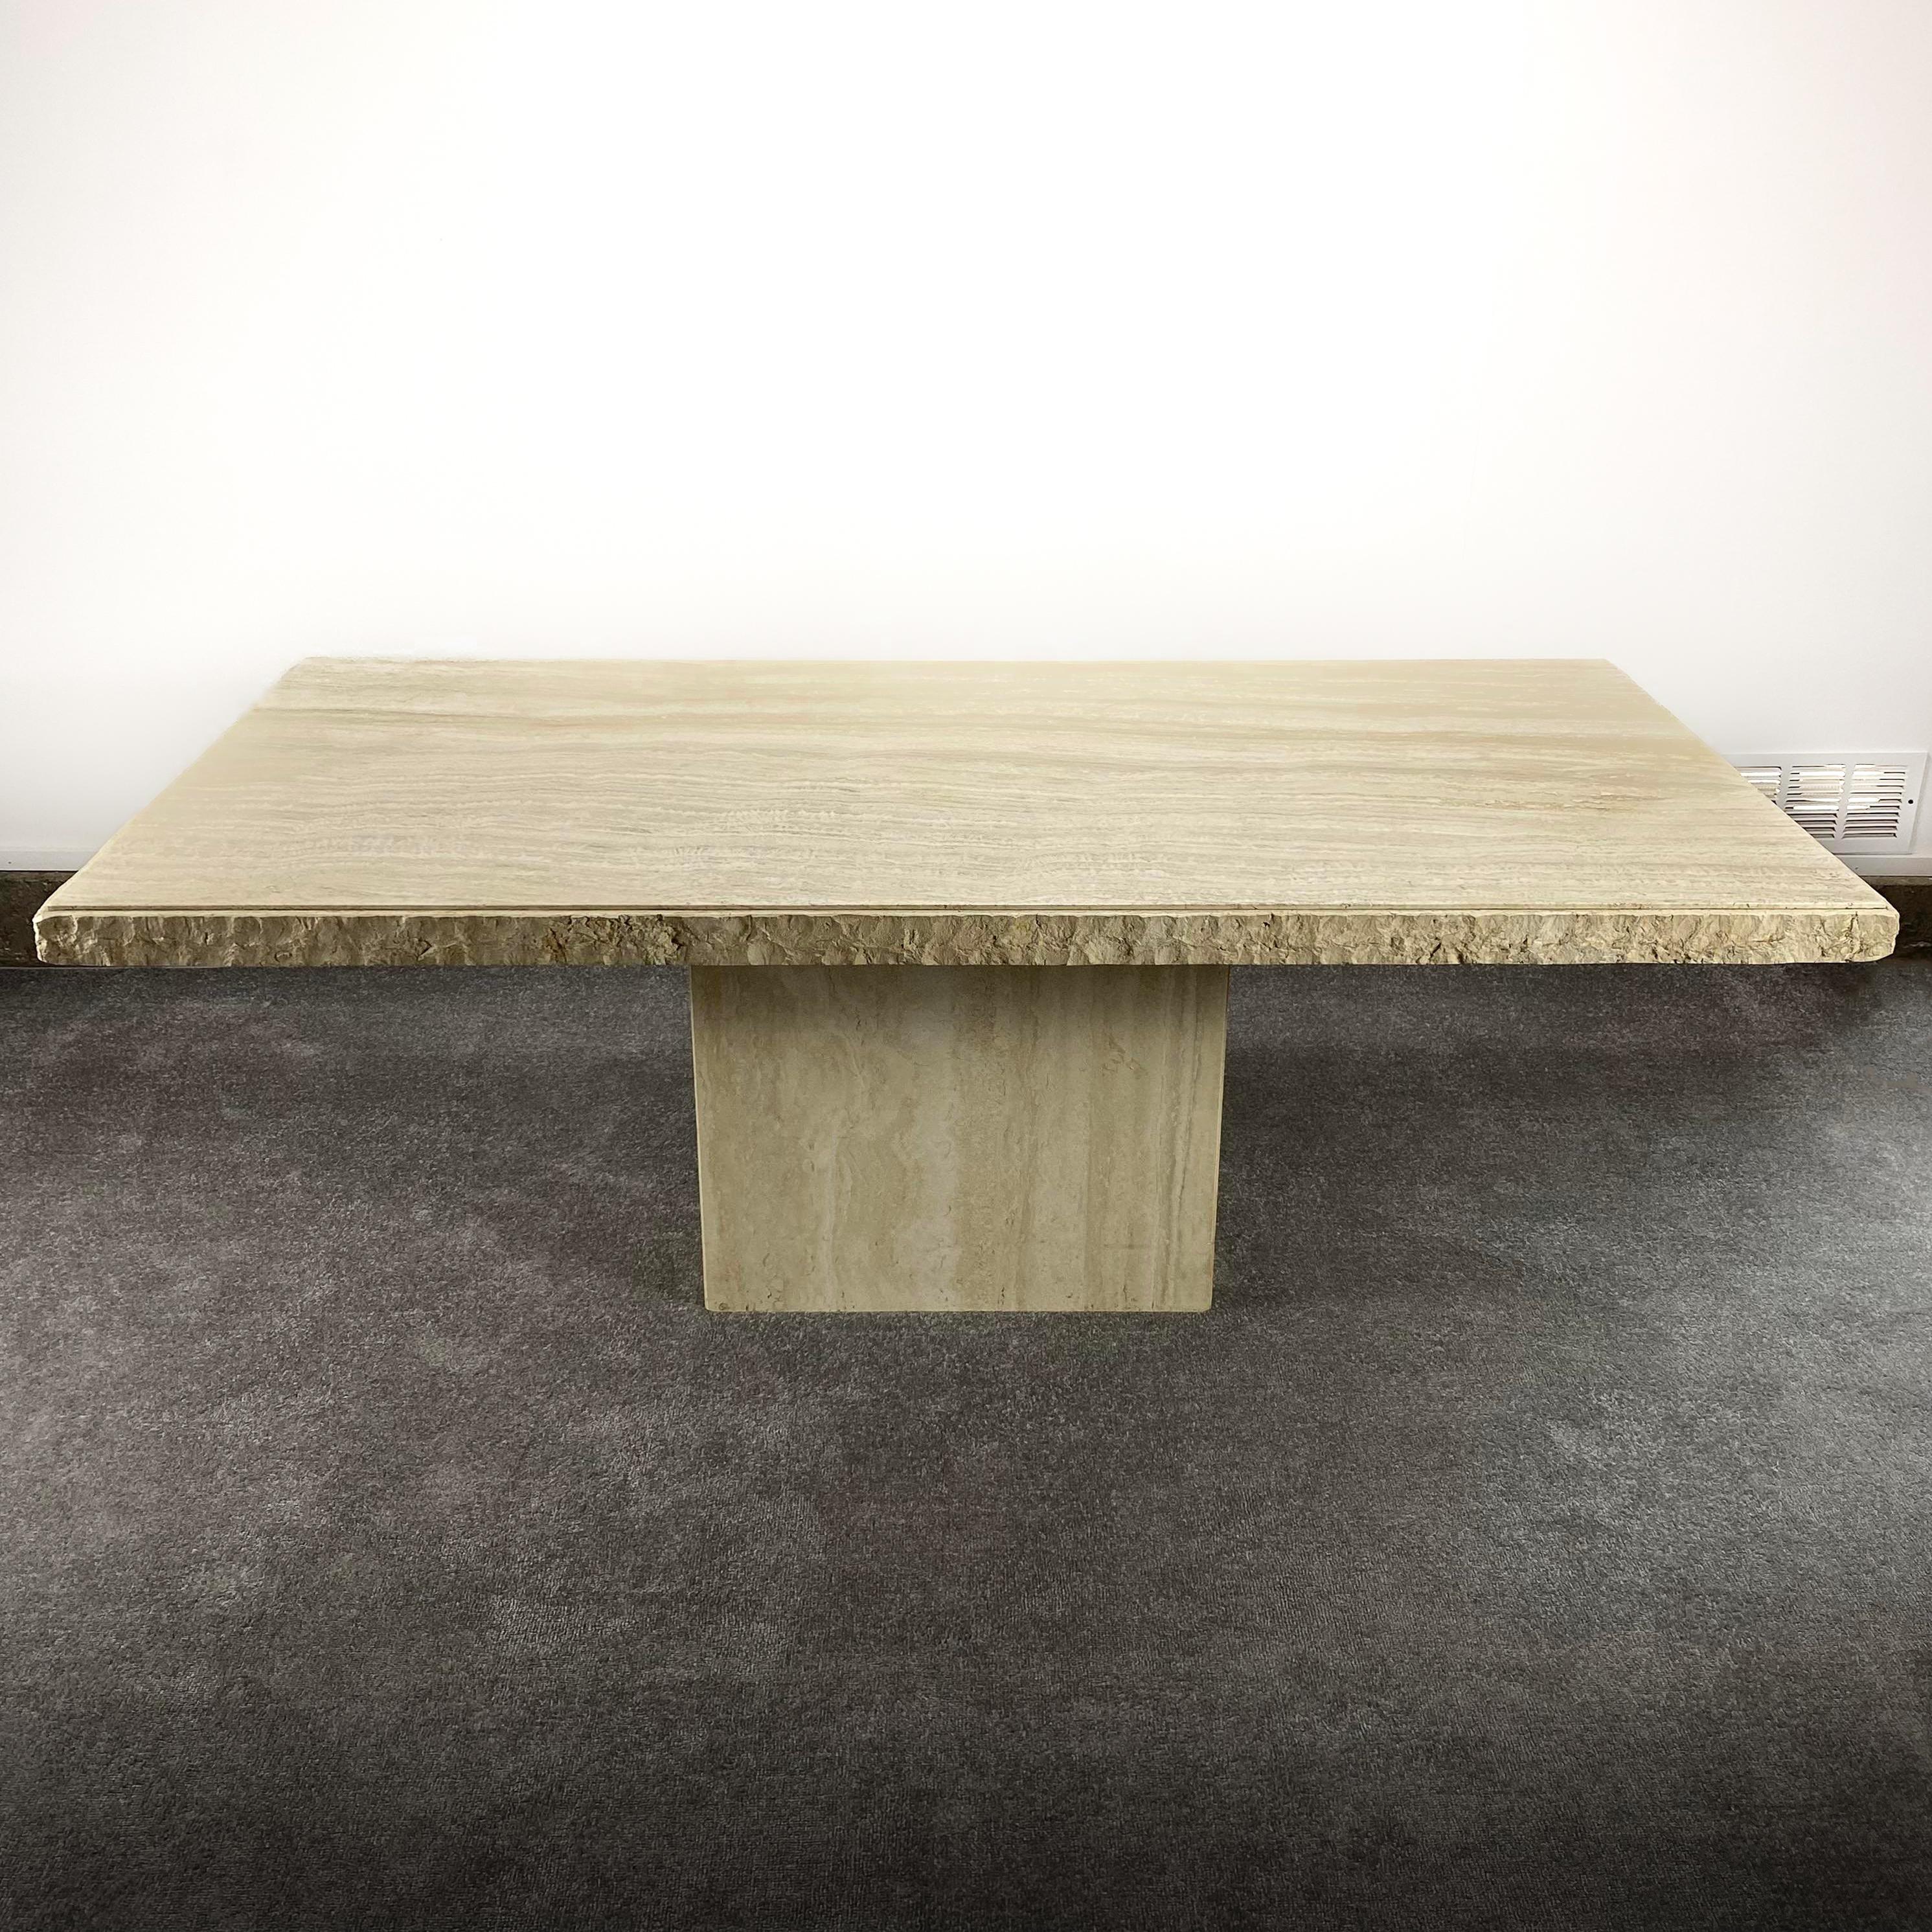 Solid raw edge travertine dining table now available. Measures approximately 79 x 39.75 x 29.5 T. In In excellent condition. Features 